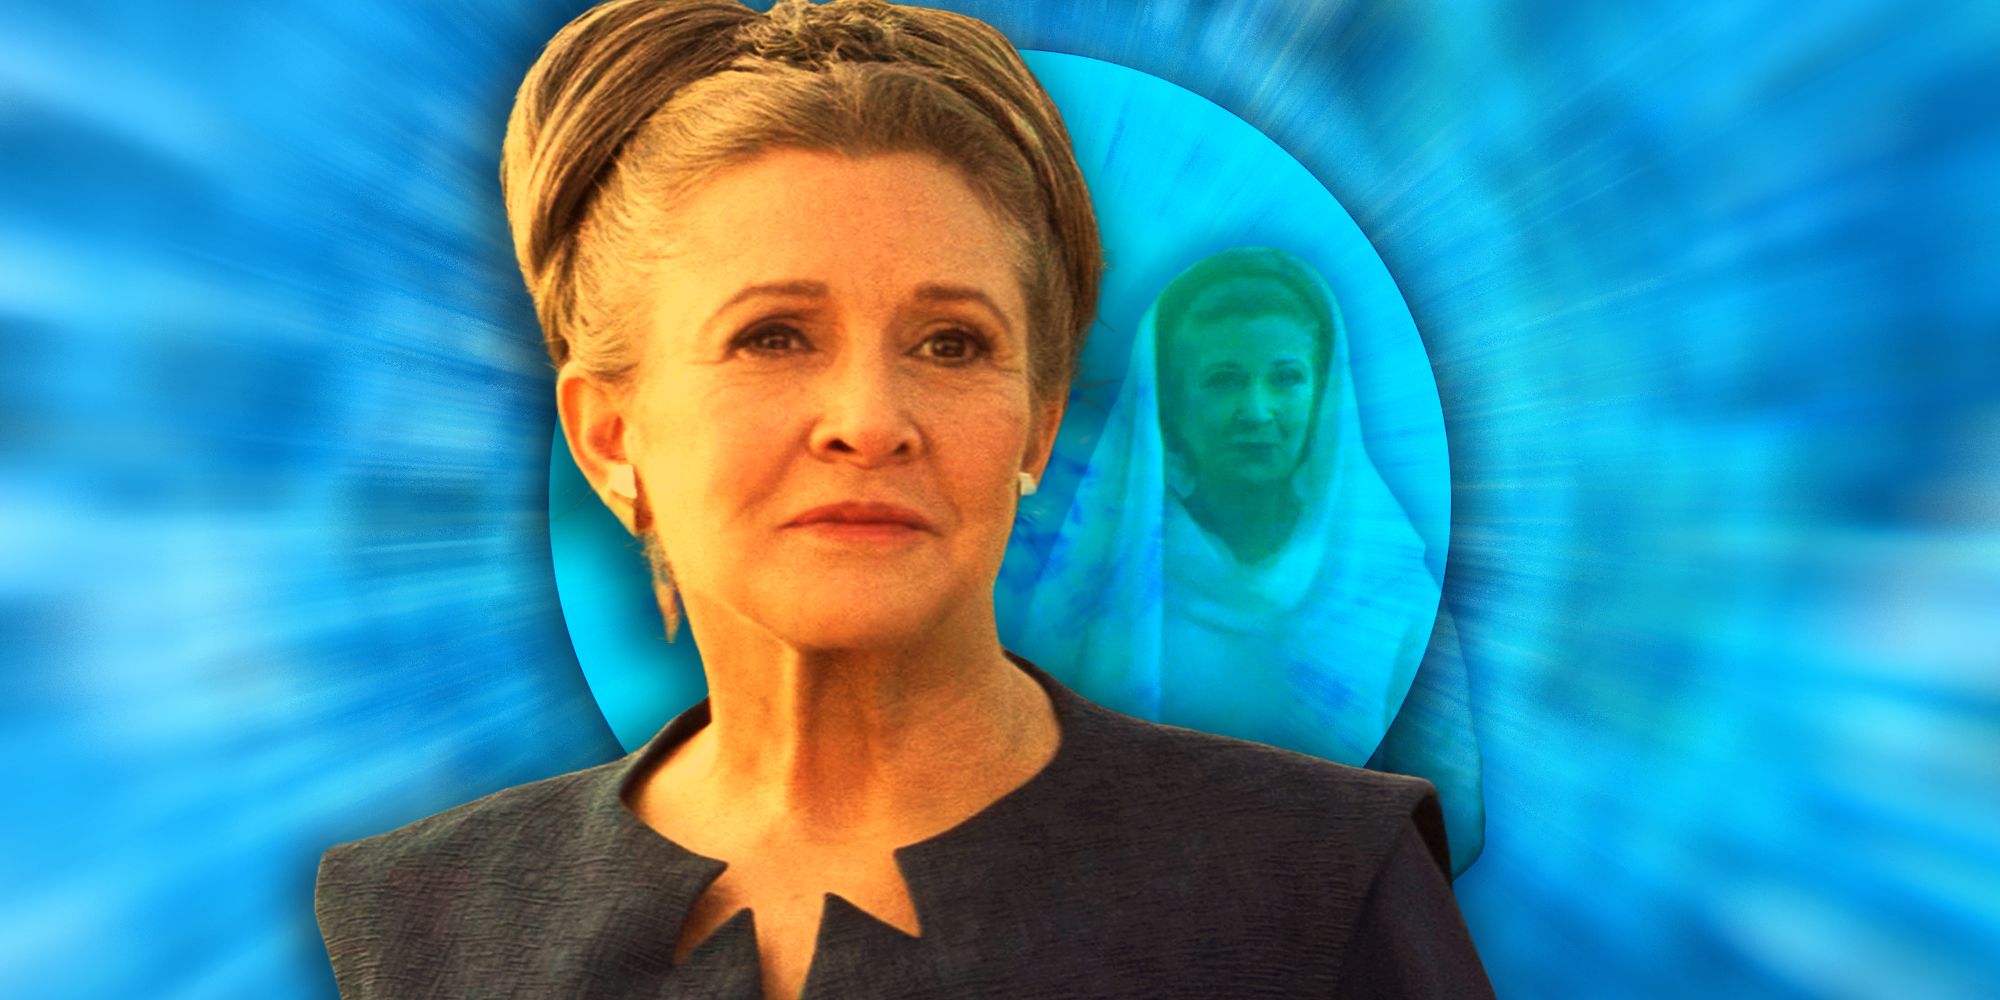 Carrie Fisher smiles as Princess Leia in The Force Awakens with her Force ghost superimposed in the background